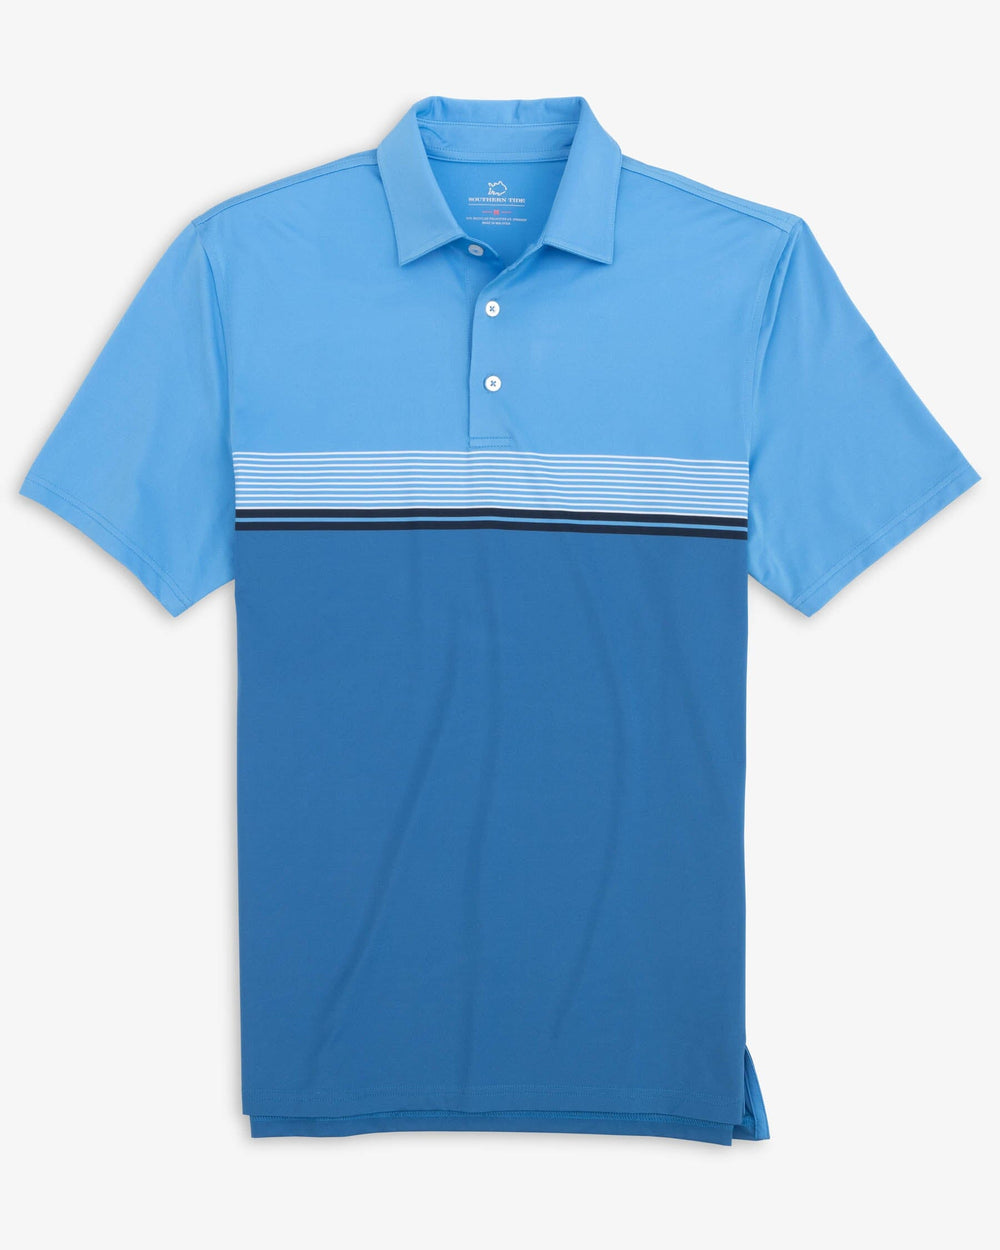 The front view of the Southern Tide Driver Wildwood Stripe Polo Shirt by Southern Tide - Boat Blue